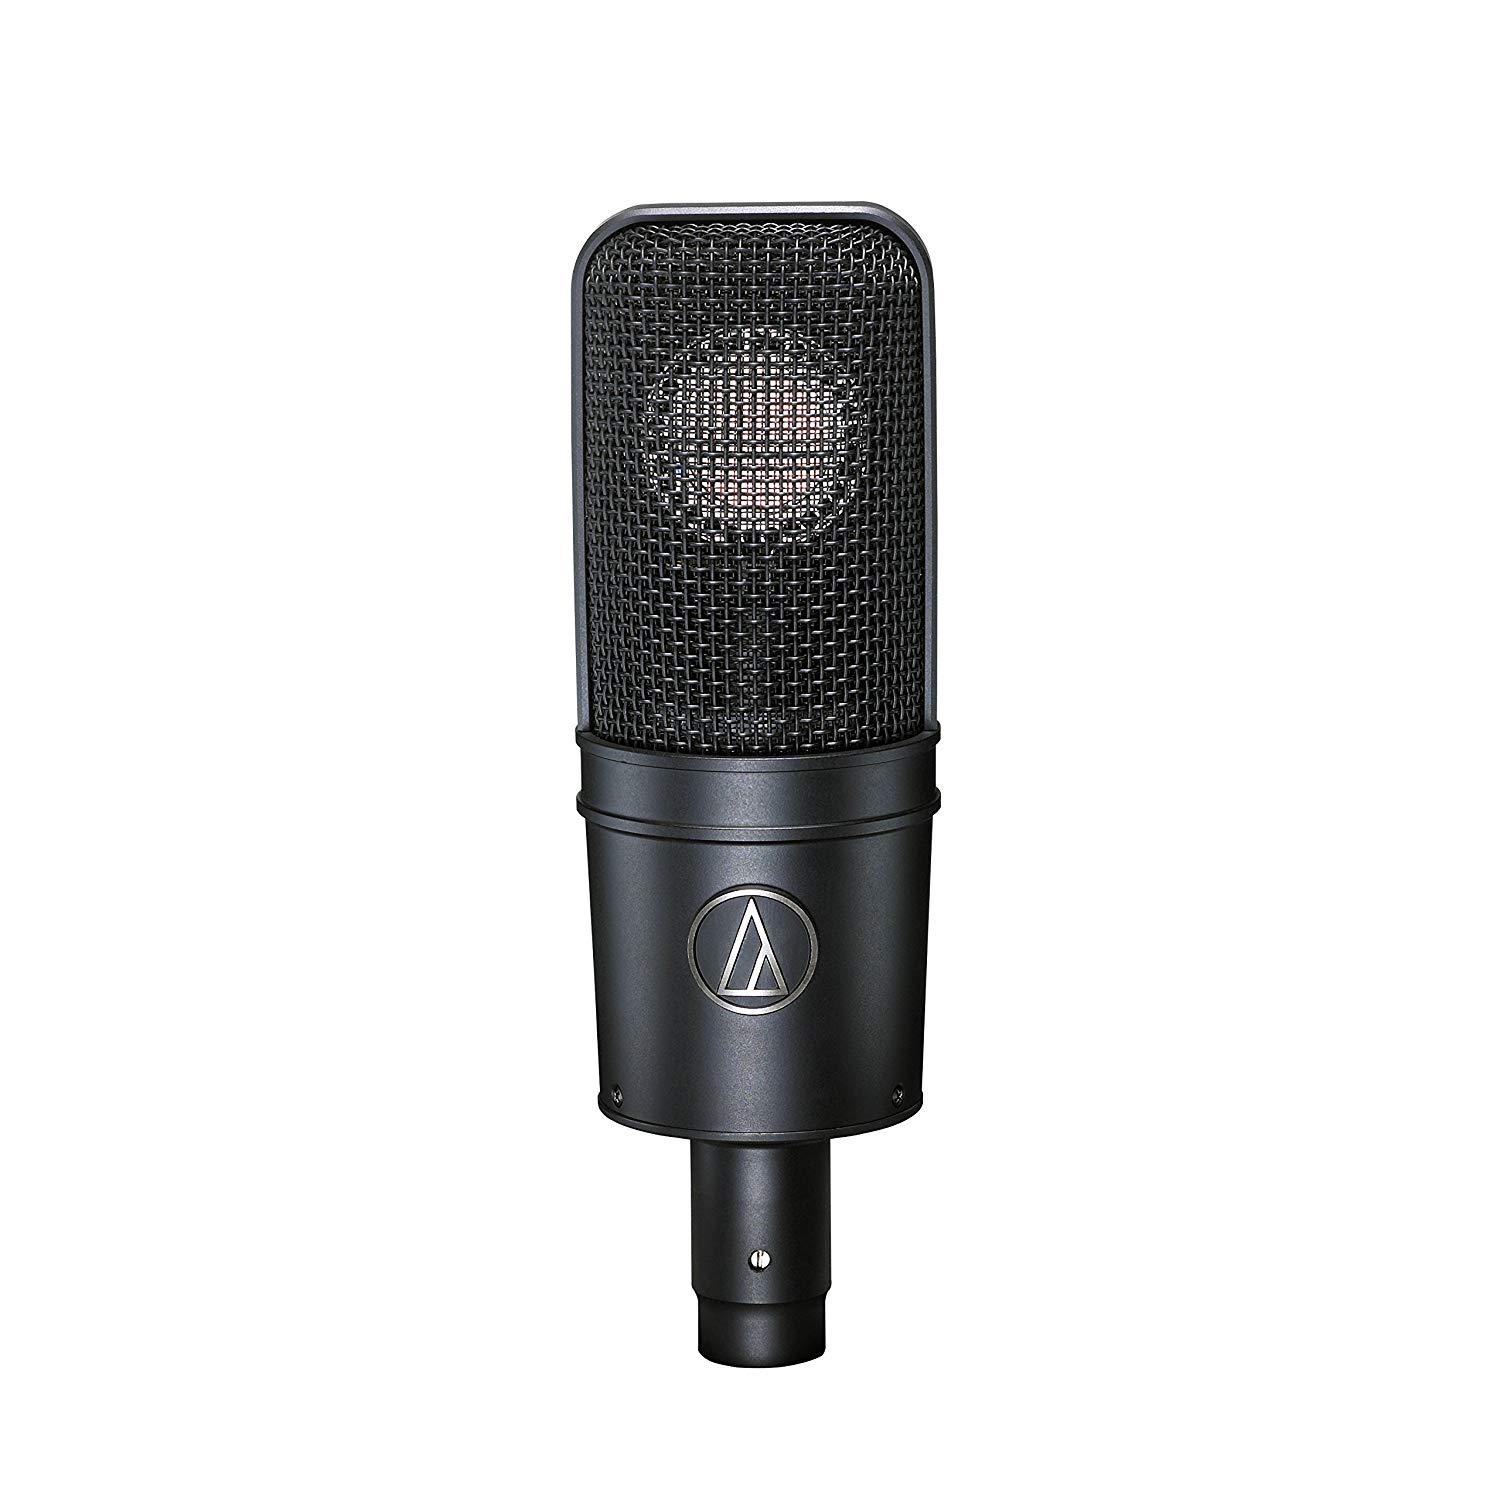 Microphone - image 1 of 4